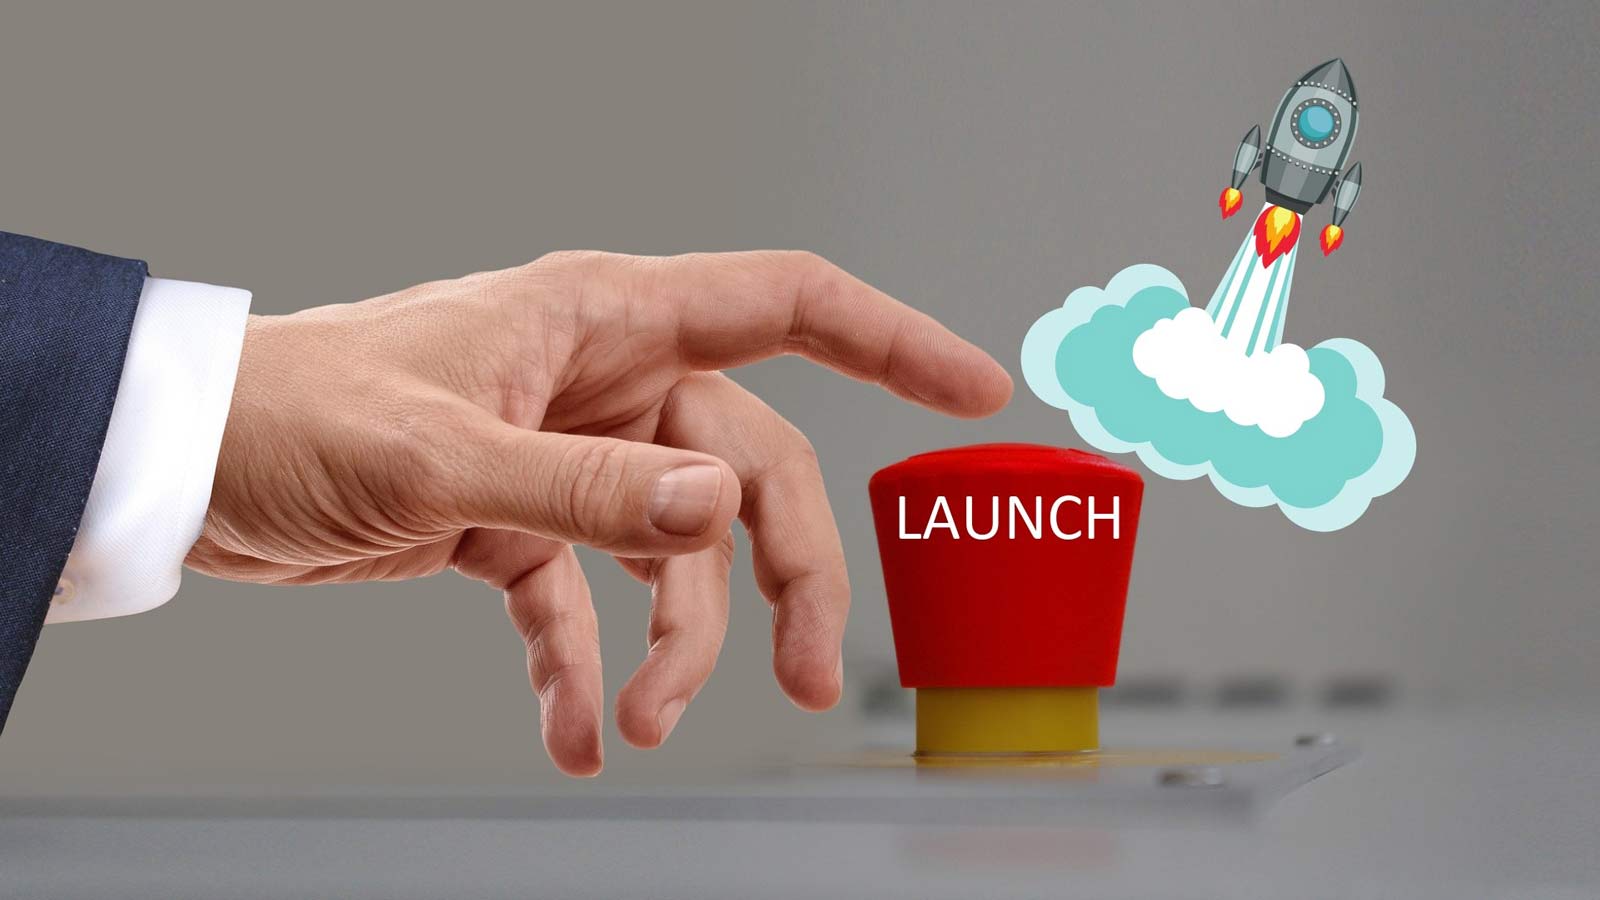 Image of someone hitting the “Launch” button for a new product launch marketing strategy 